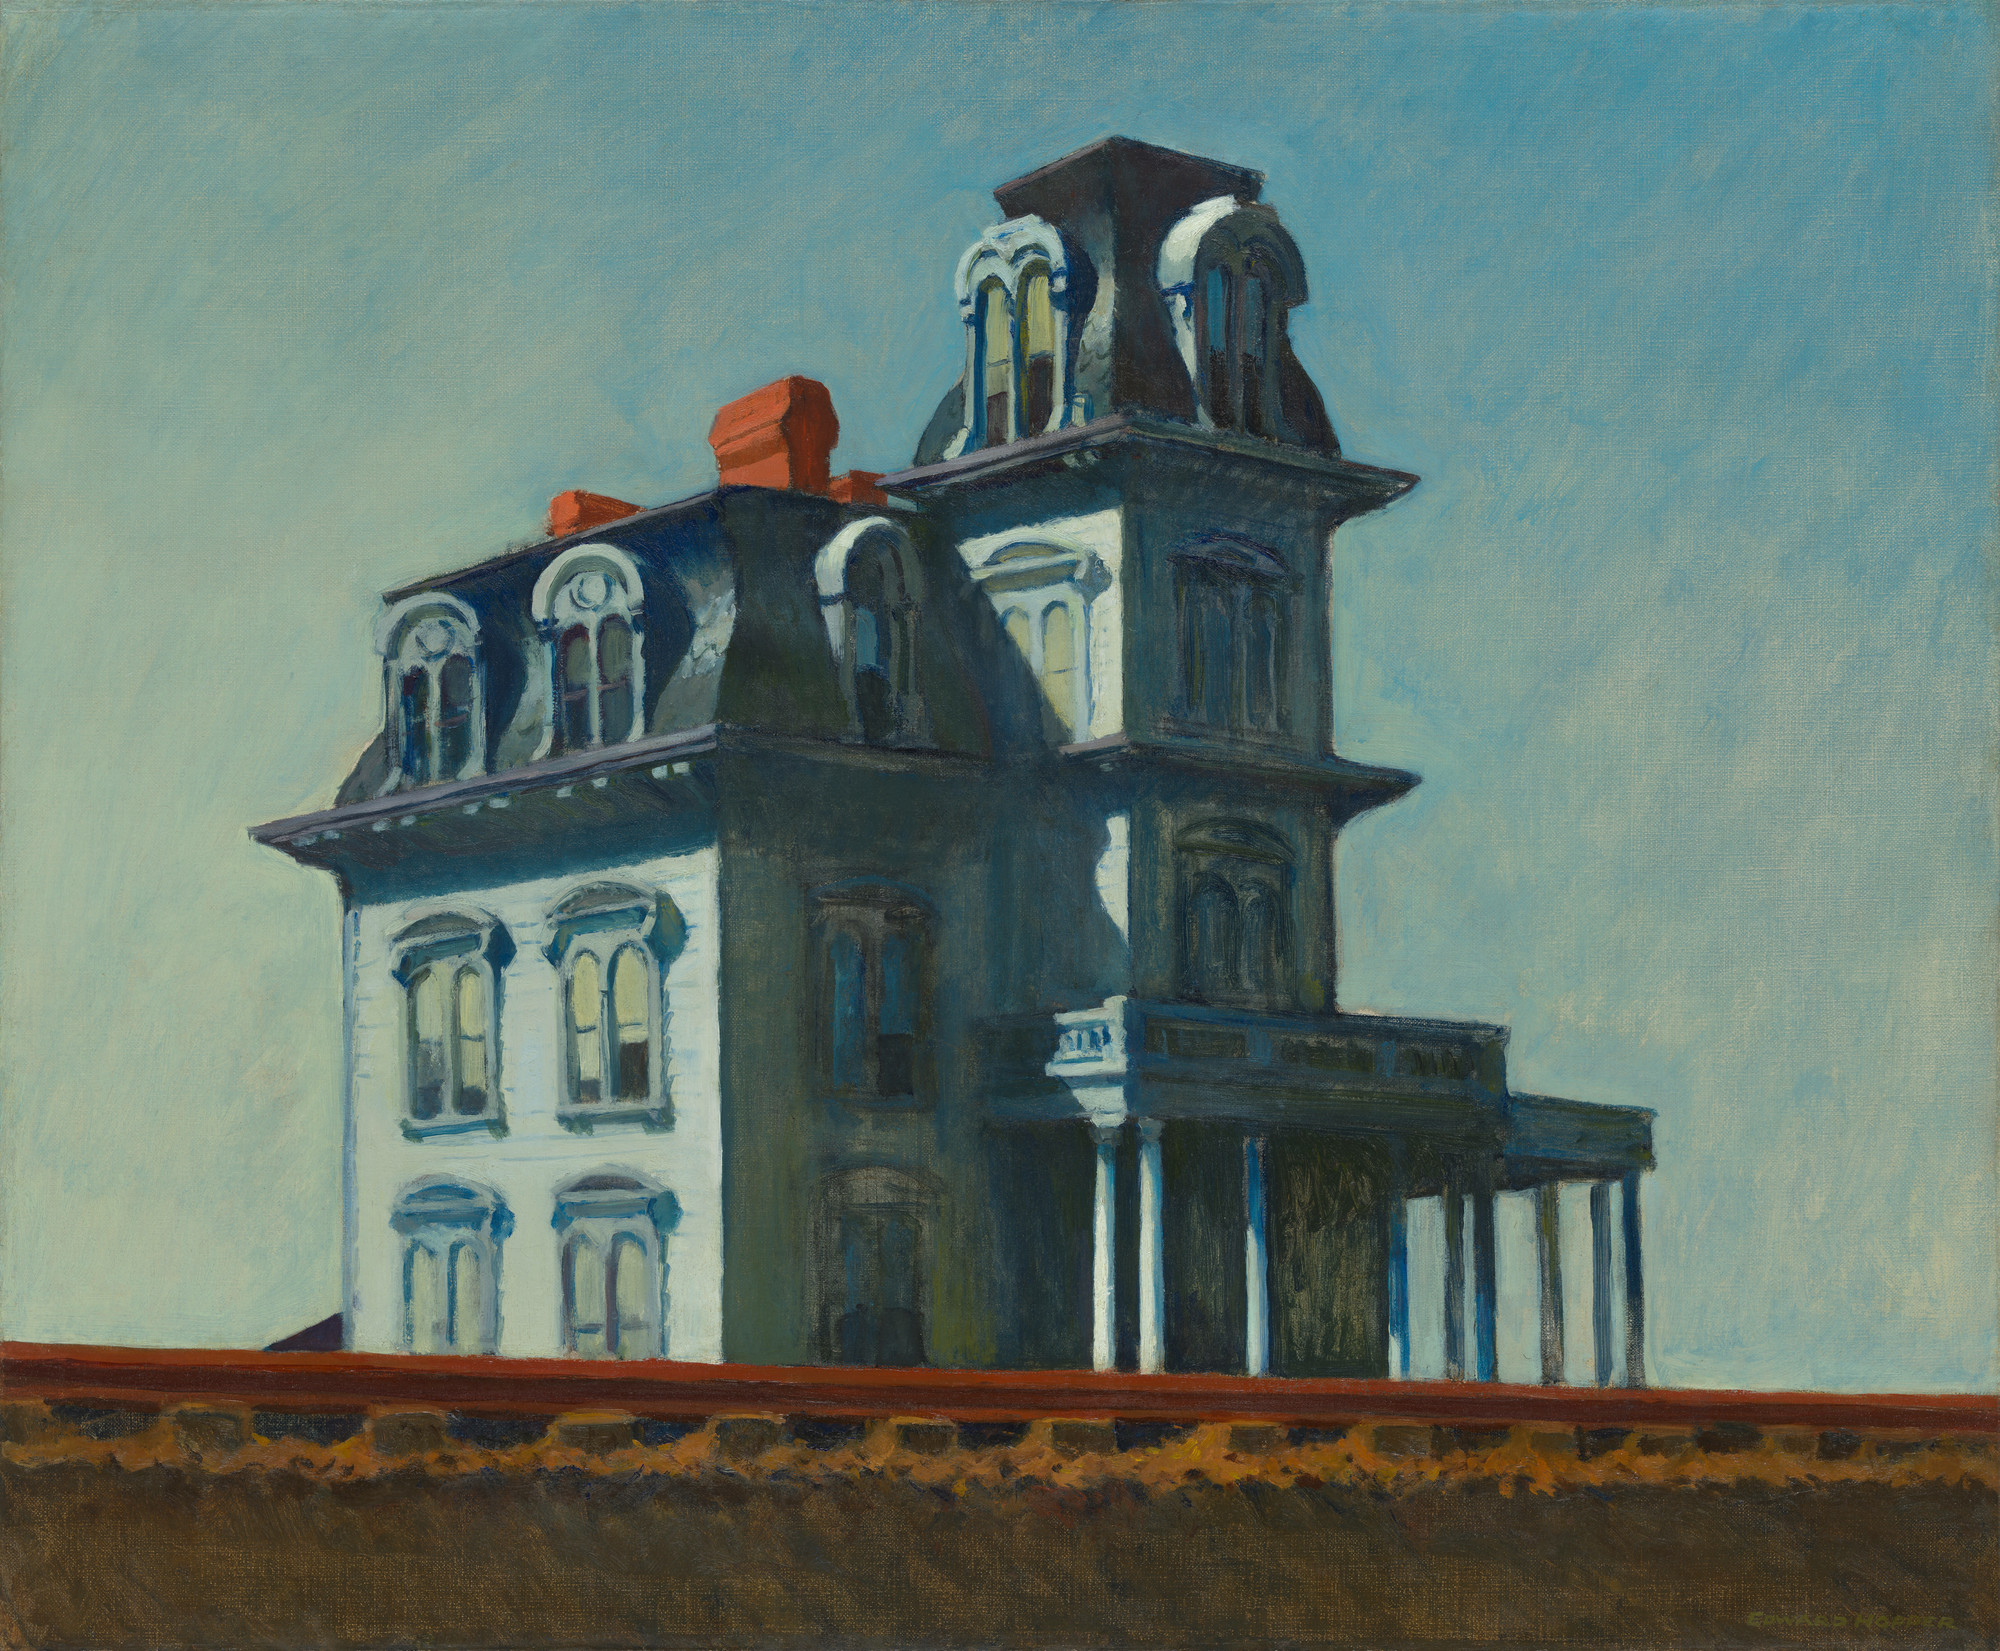 Introduction to the exhibition _American Modern: Hopper to O'Keeffe_